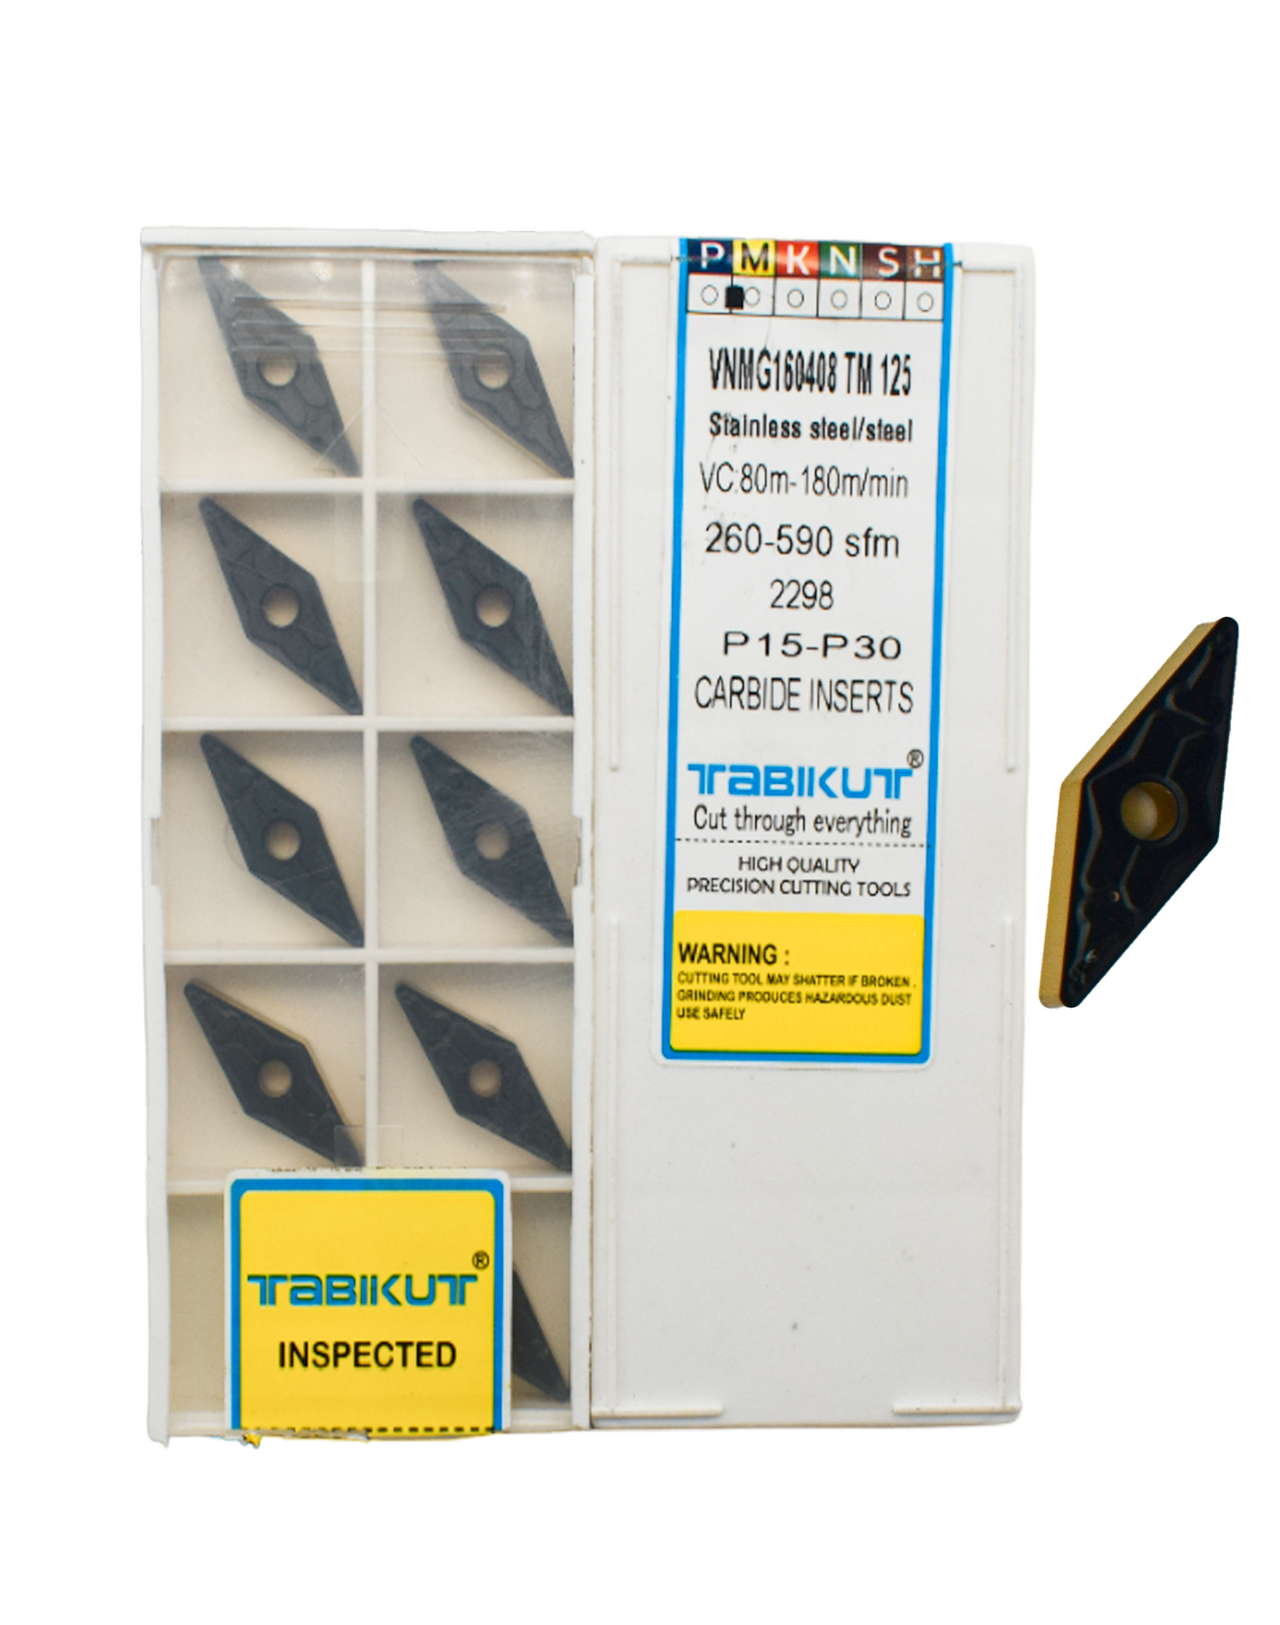 VNMG160404/08 TM 125 pack of 10